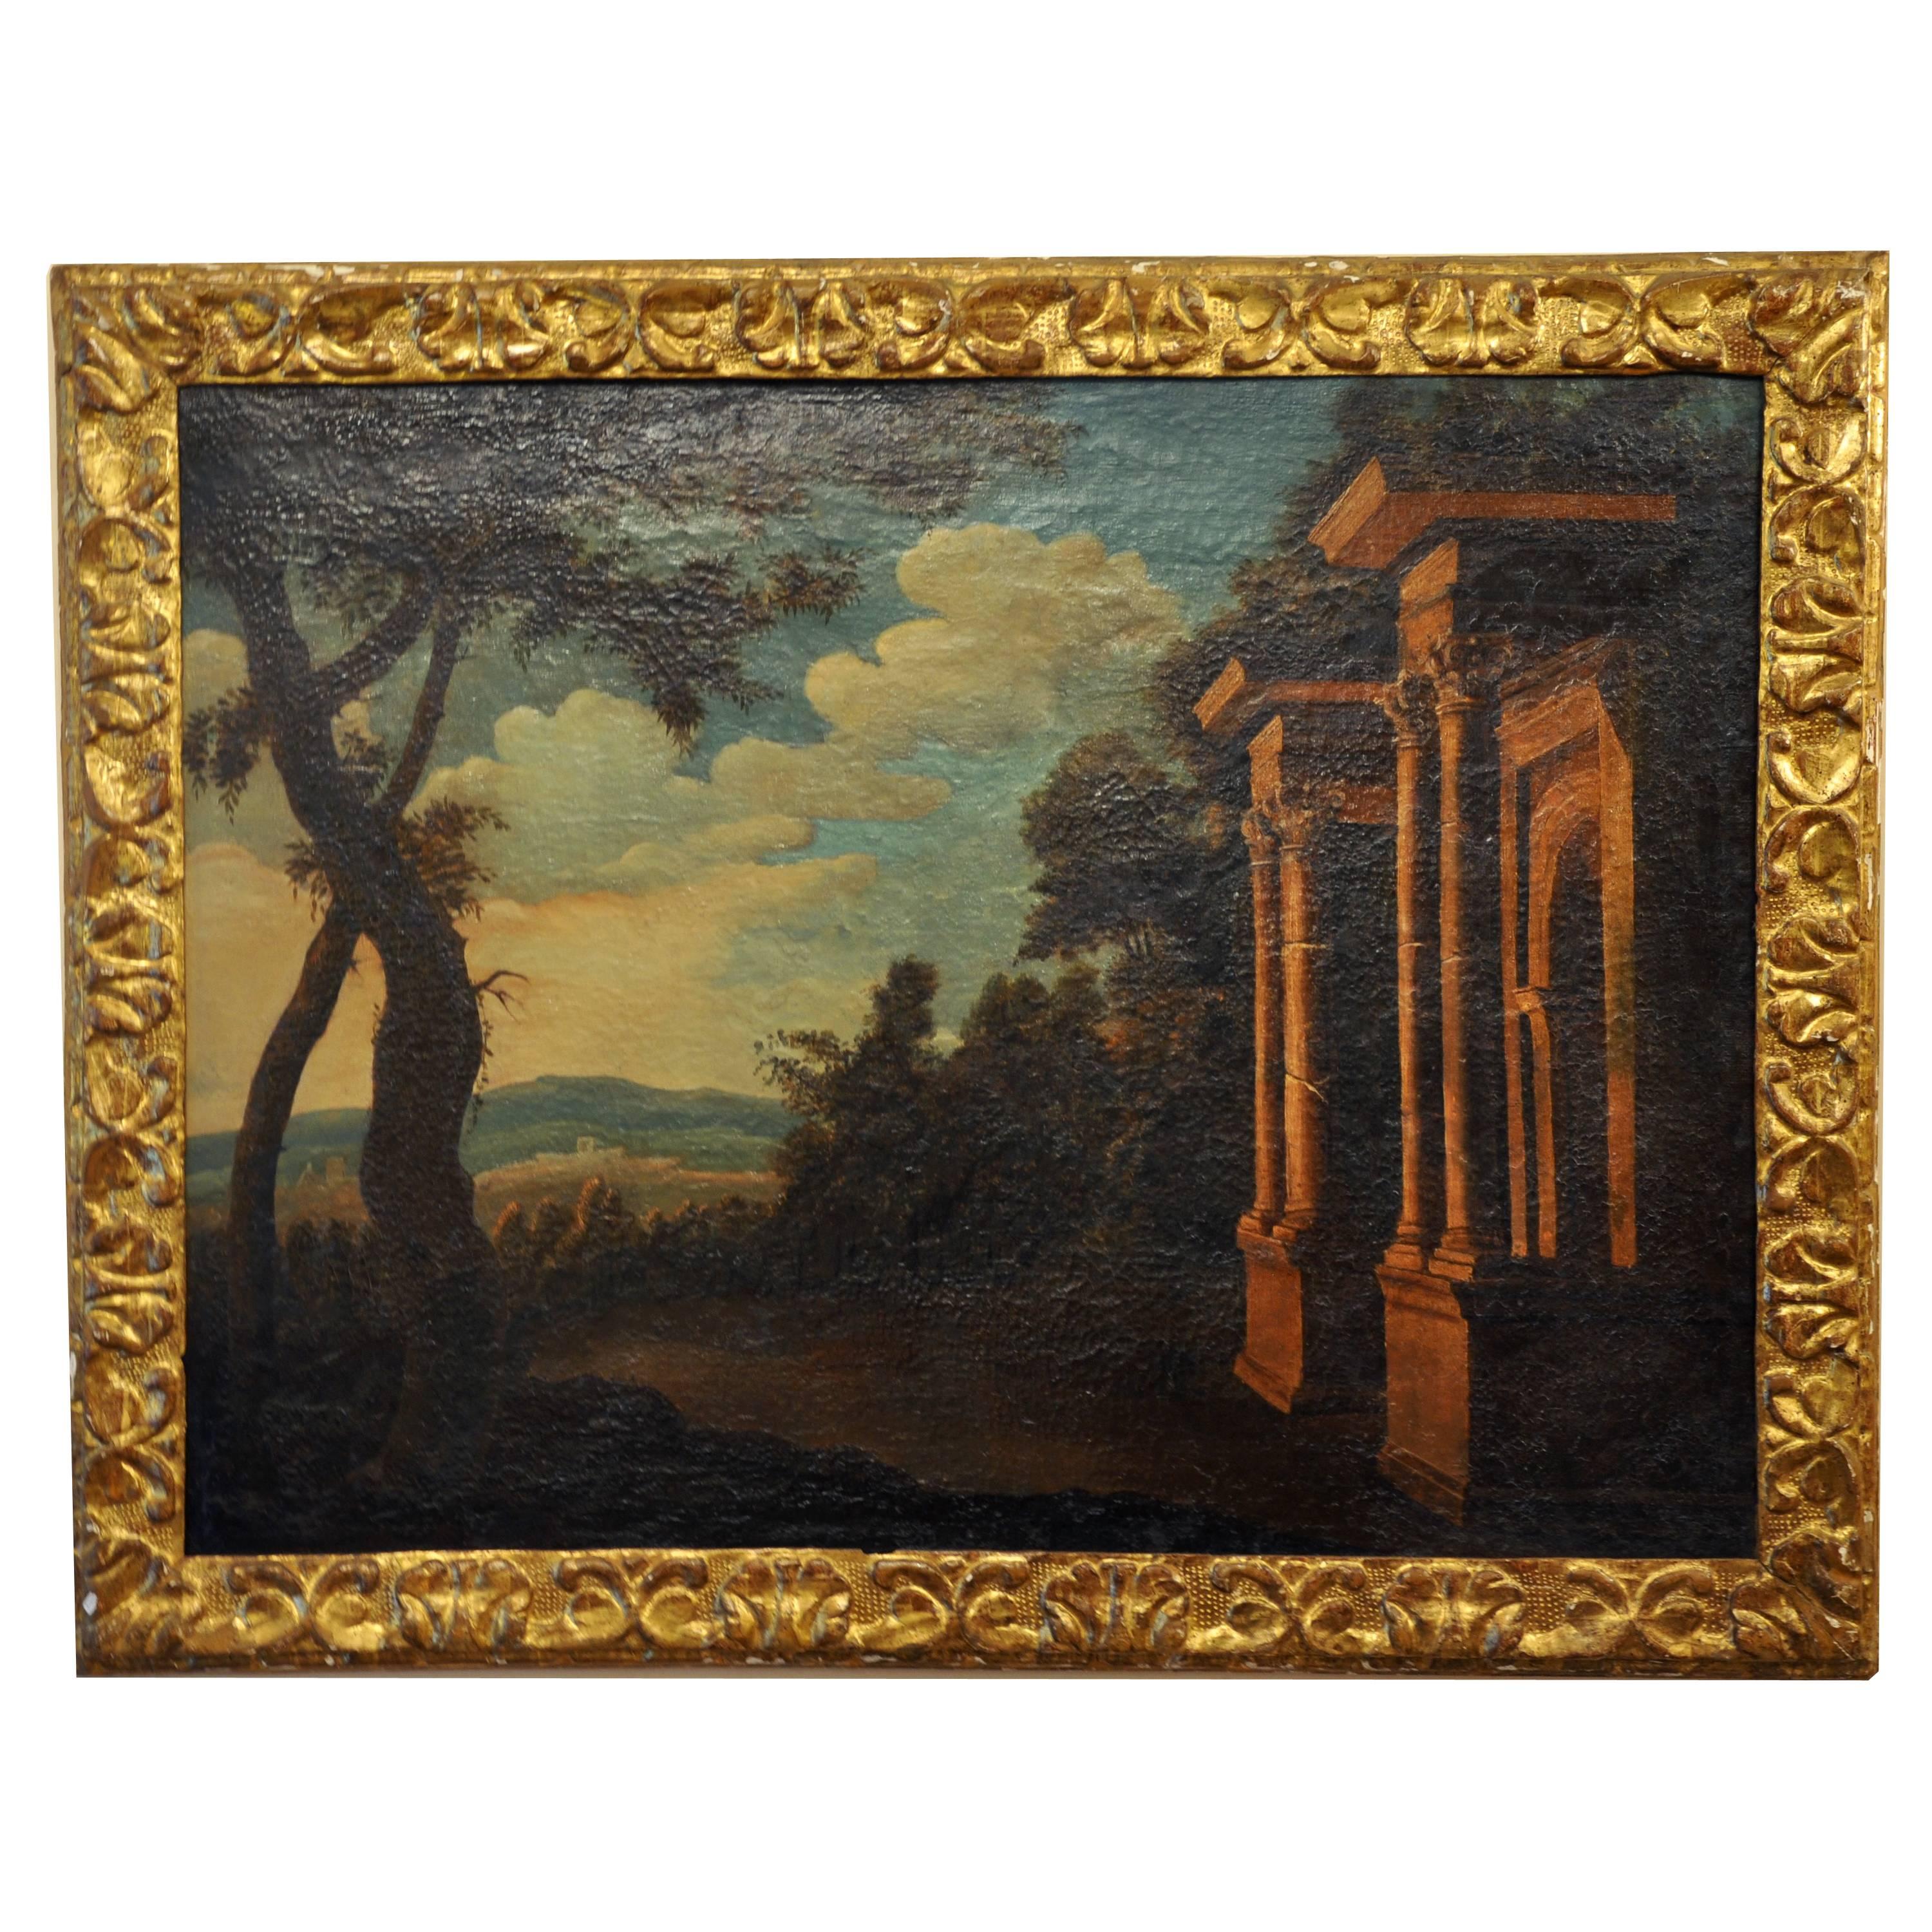 Couple of important Roman school paintings of landscapes with architectural ruins and characters. Oil on canvas with Coeval frame in hand-carved wood and gilded in gold leaf. Small restorations in the canvas sustained over time. Central Italy, early